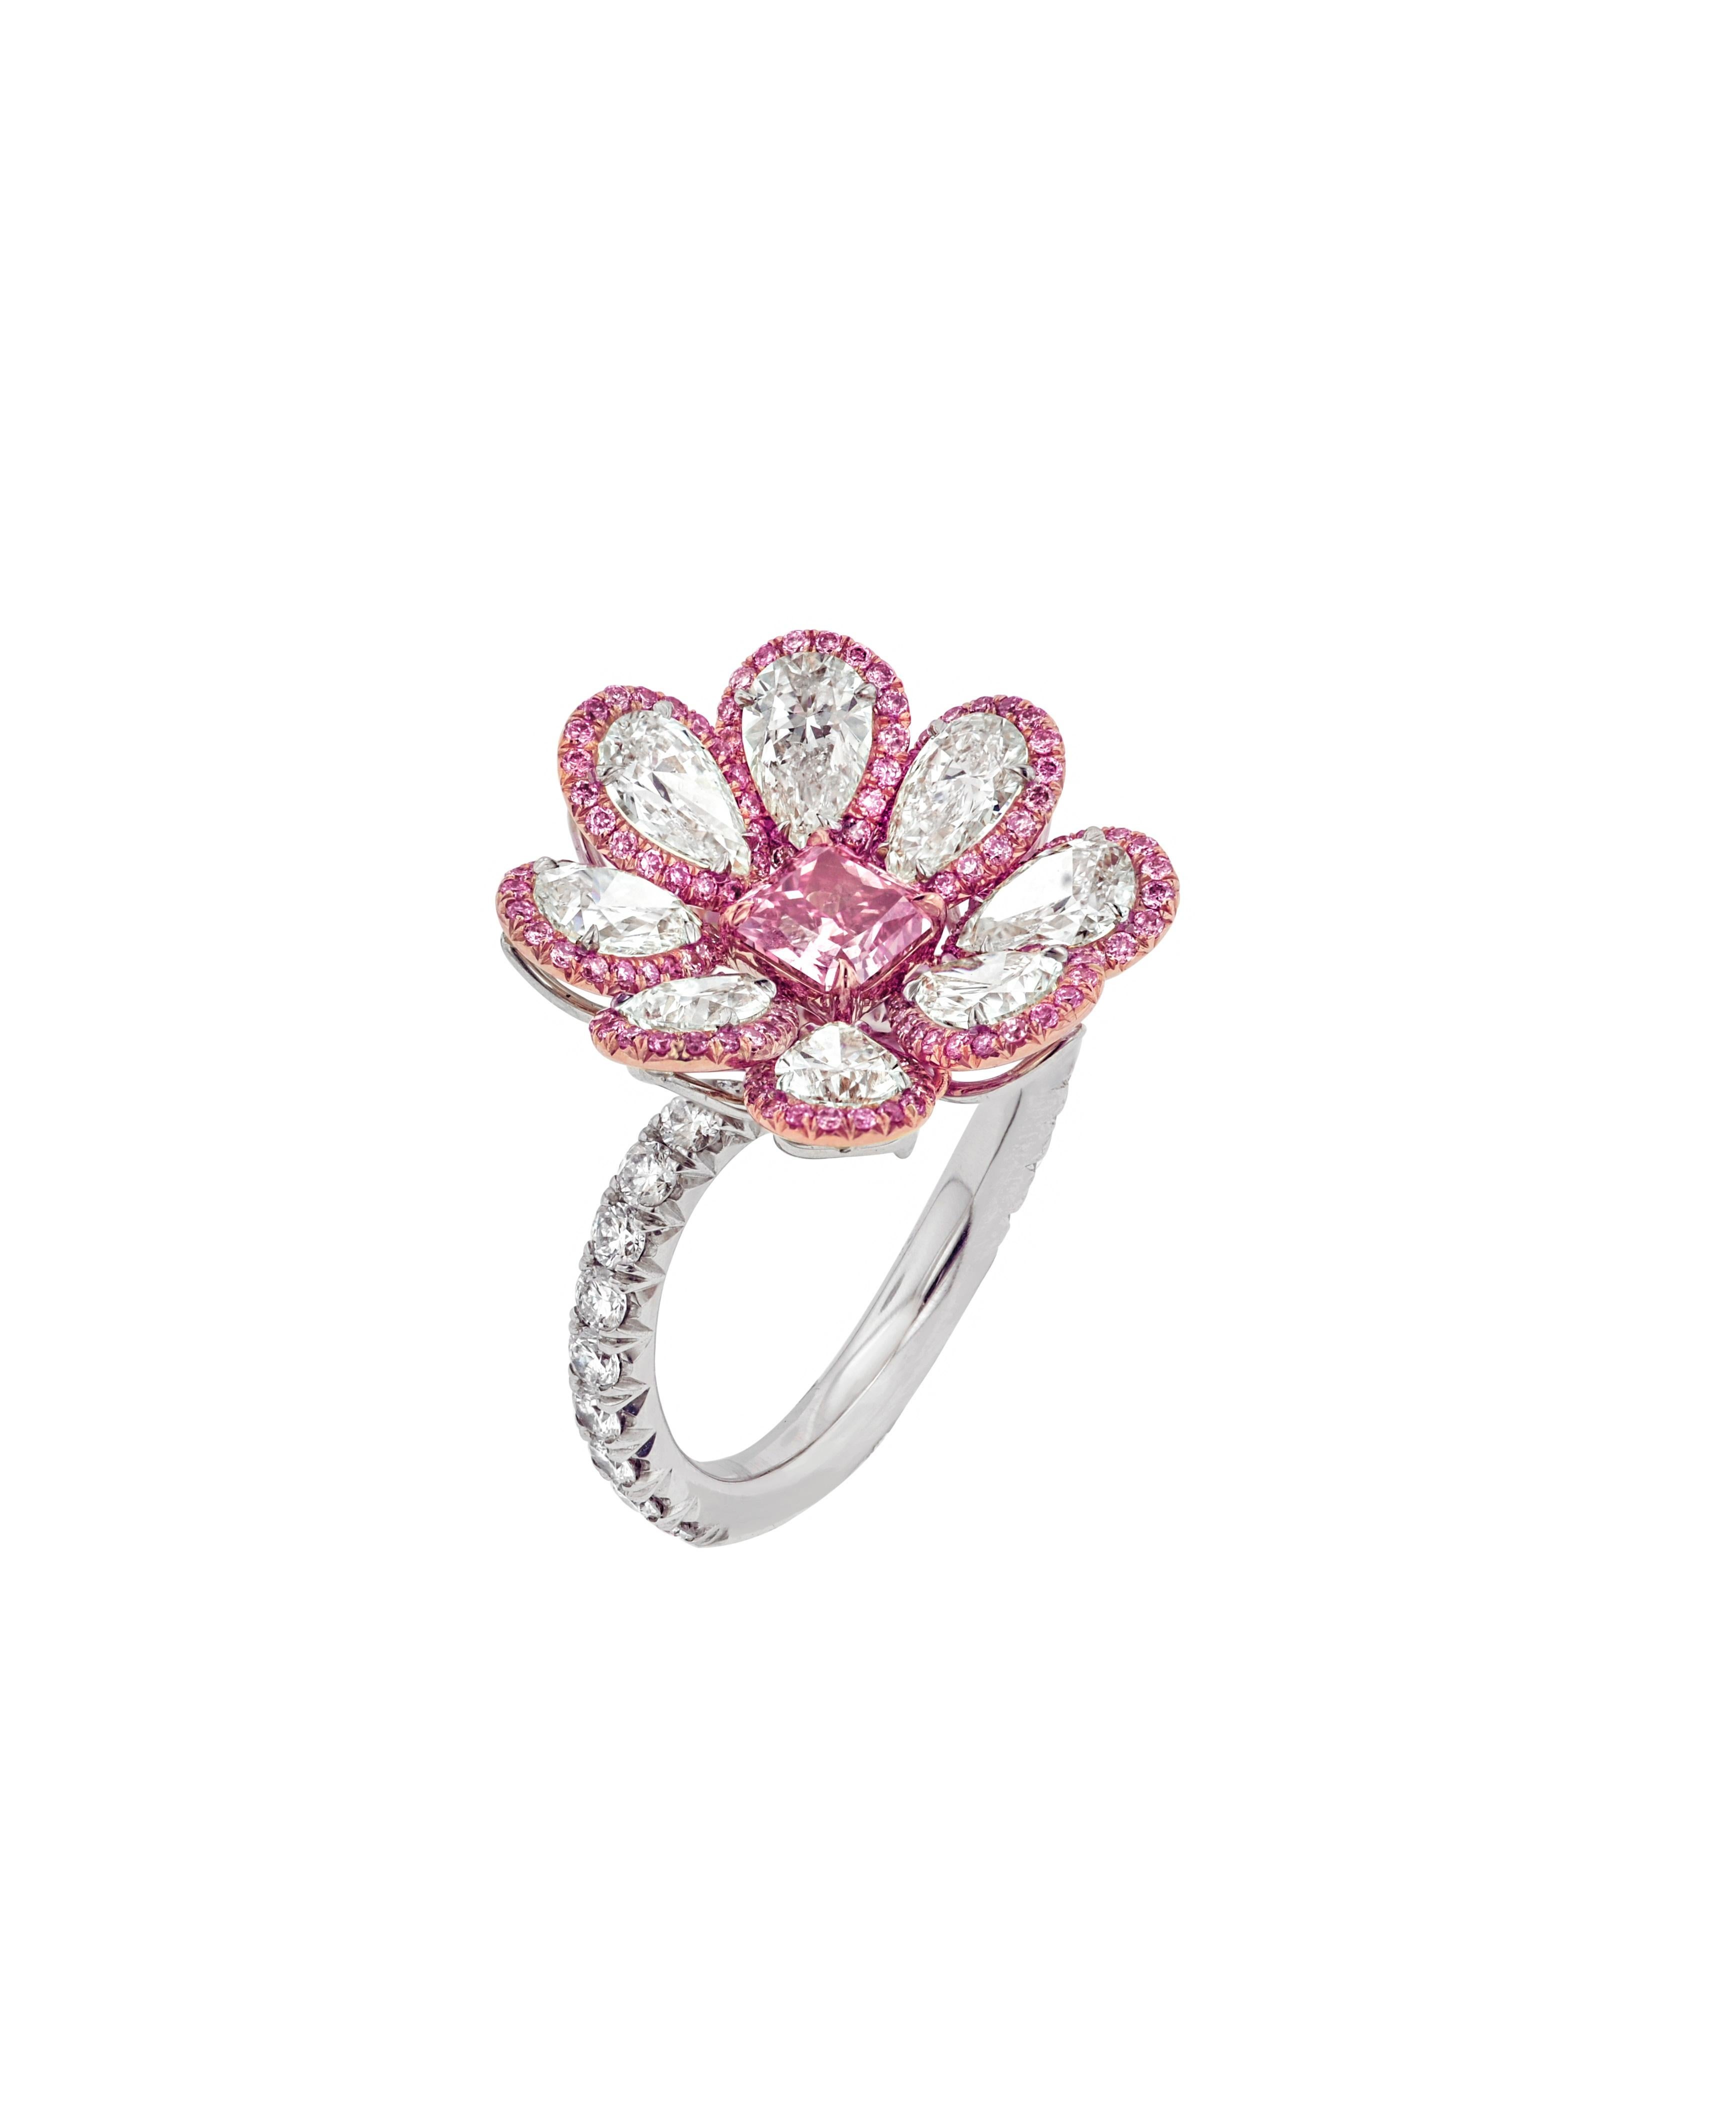 Platinum And 18kt Pink Gold Pink Diamond Ring With Center Gia Certified .80 Fancy Vivid Pink Set With 8 White Pear Shape Diamonds 4.05 Ct And Surrounded By Micropave Pink Diamonds 0.70ct.